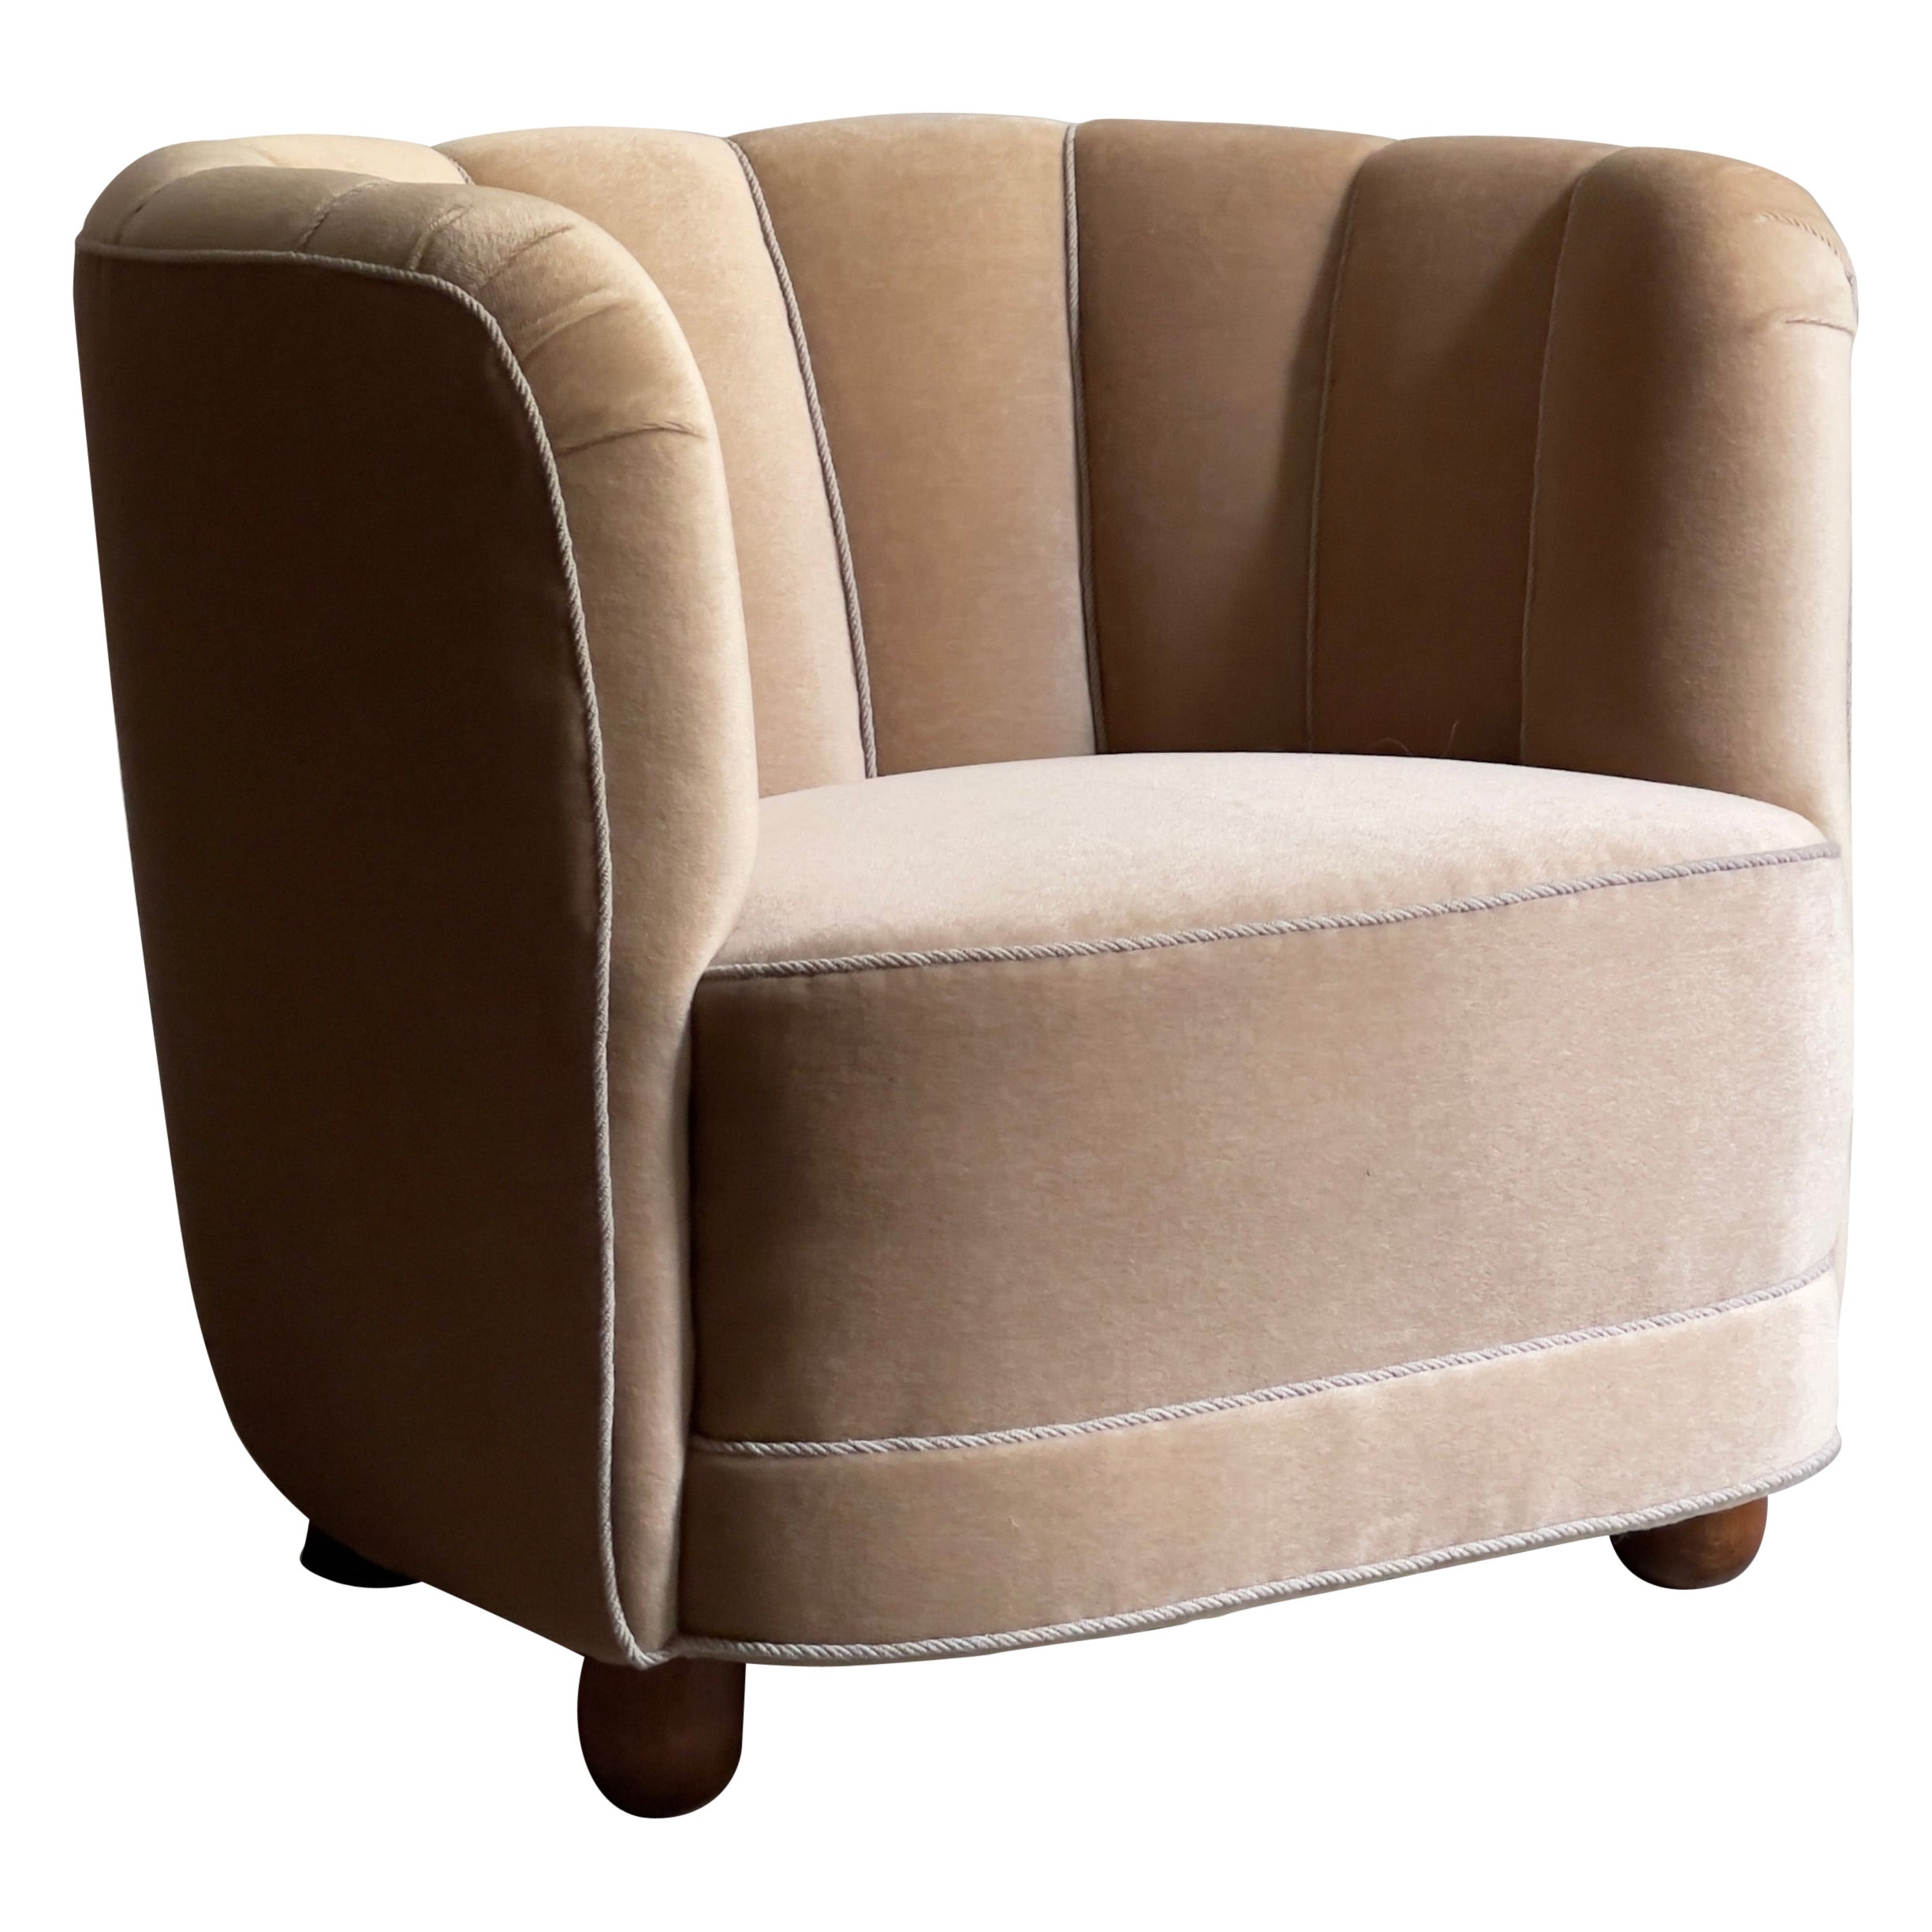 1930s Danish modern Easy Chair reupholstered in Premium beige Mohair For Sale